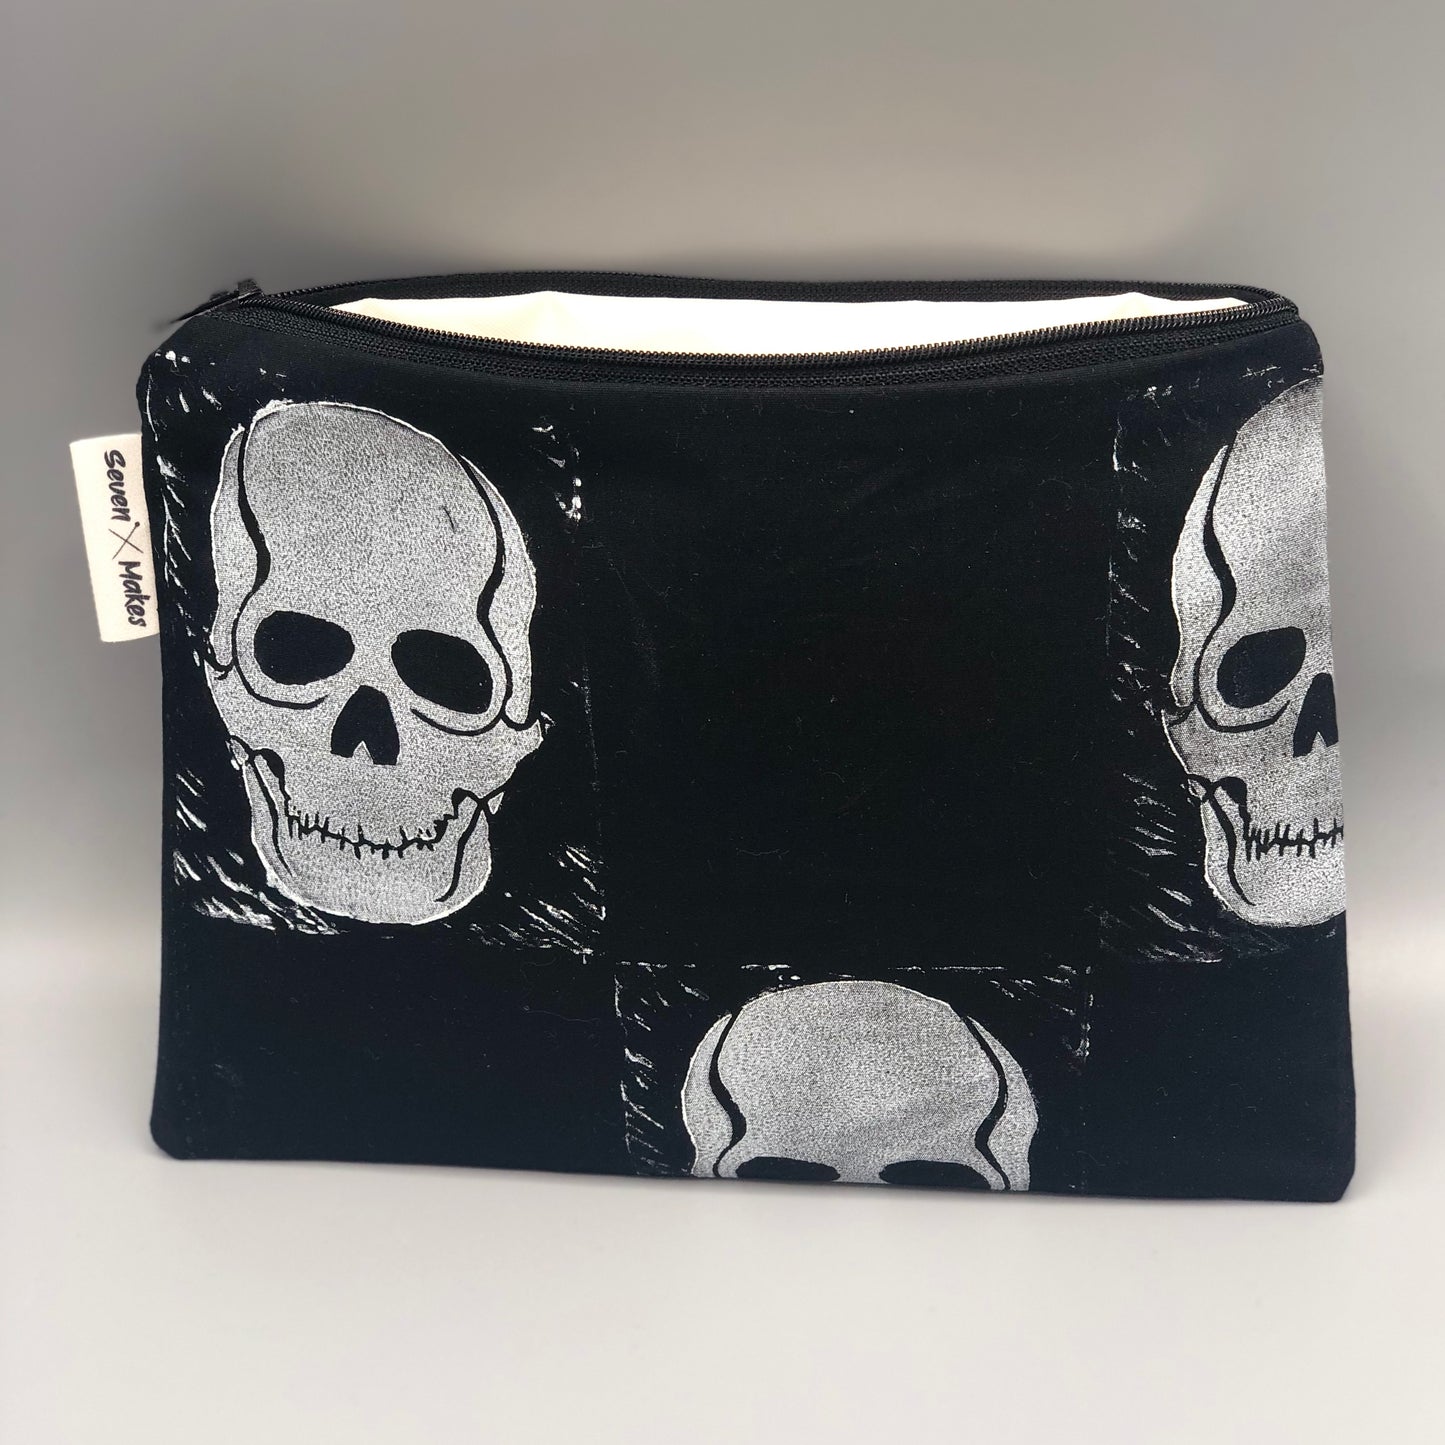 Hand printed Skull Fabric Zipper Pouch - two sizes and with waterproof lining option